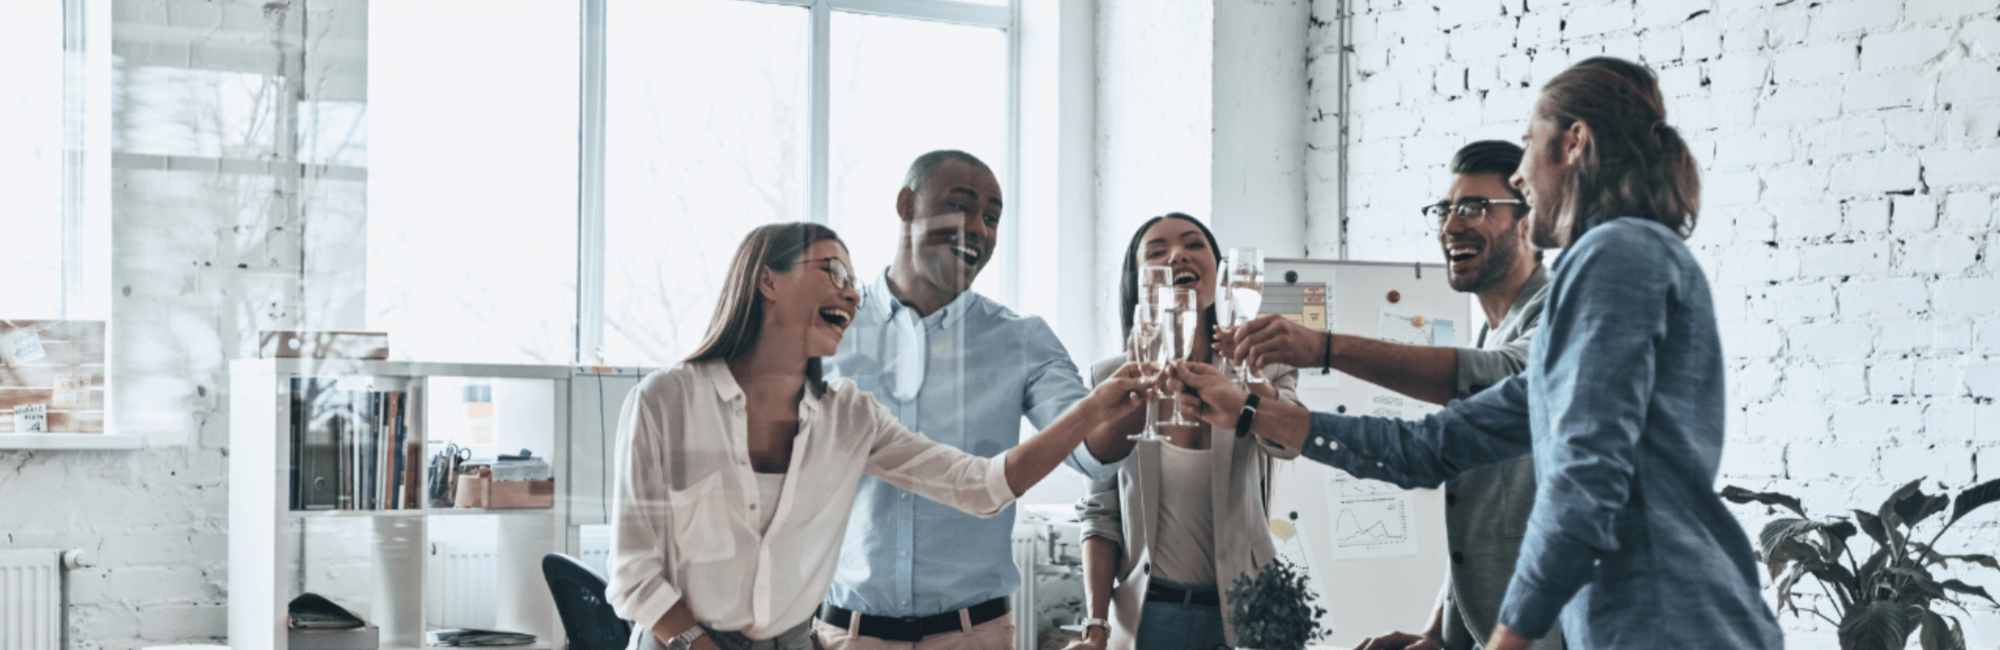 Blog Header image, group of five people cheersing glasses of bubbly in an office environment